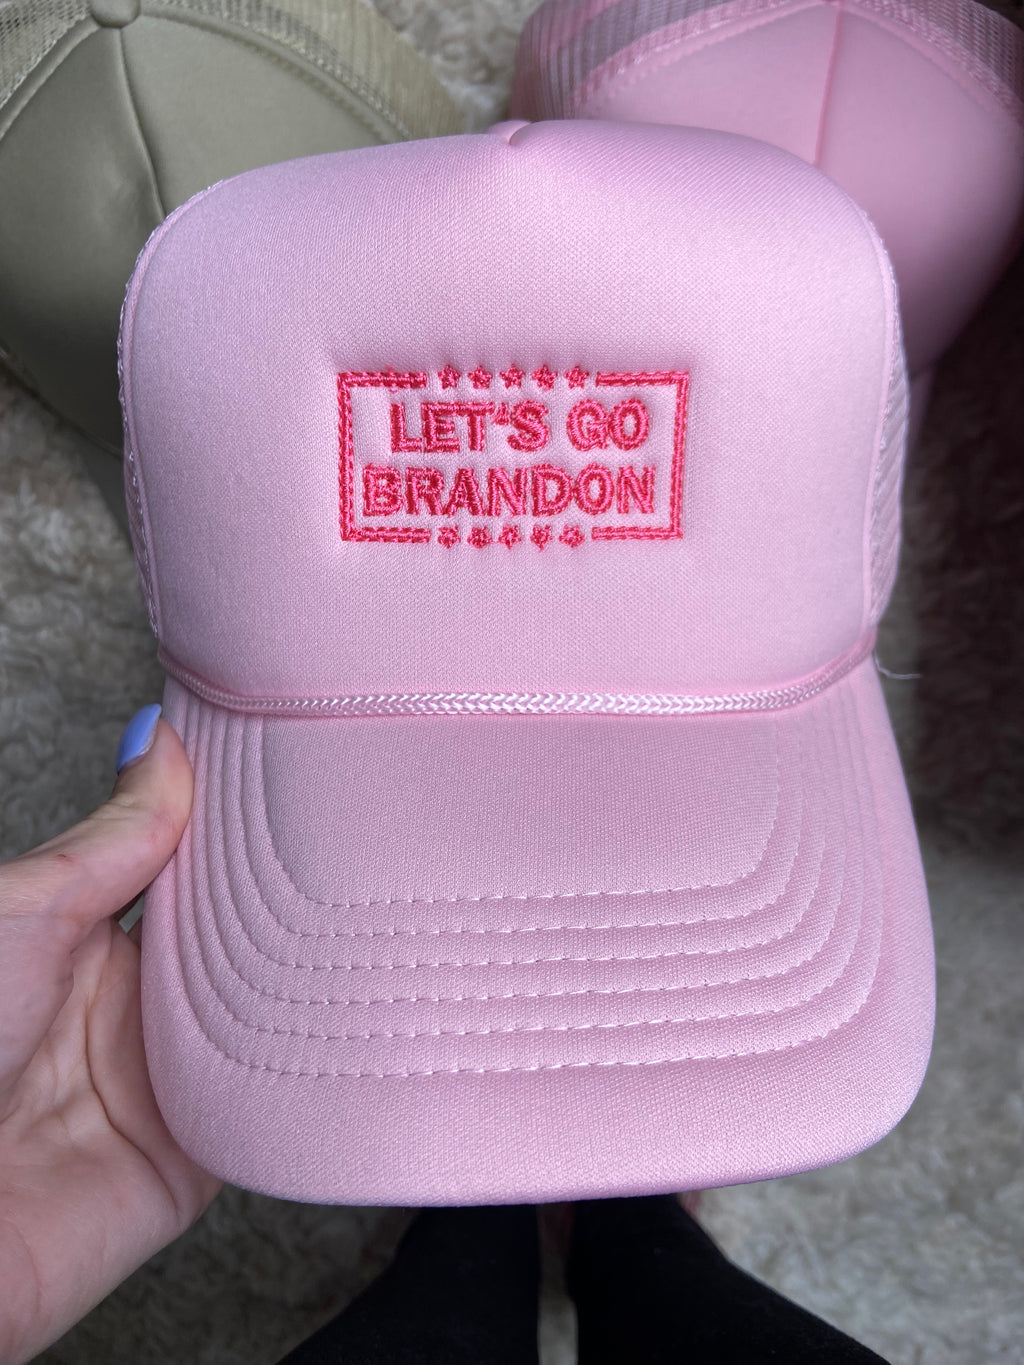 Lets go Brandon light pink trucker hat with hot pink thread